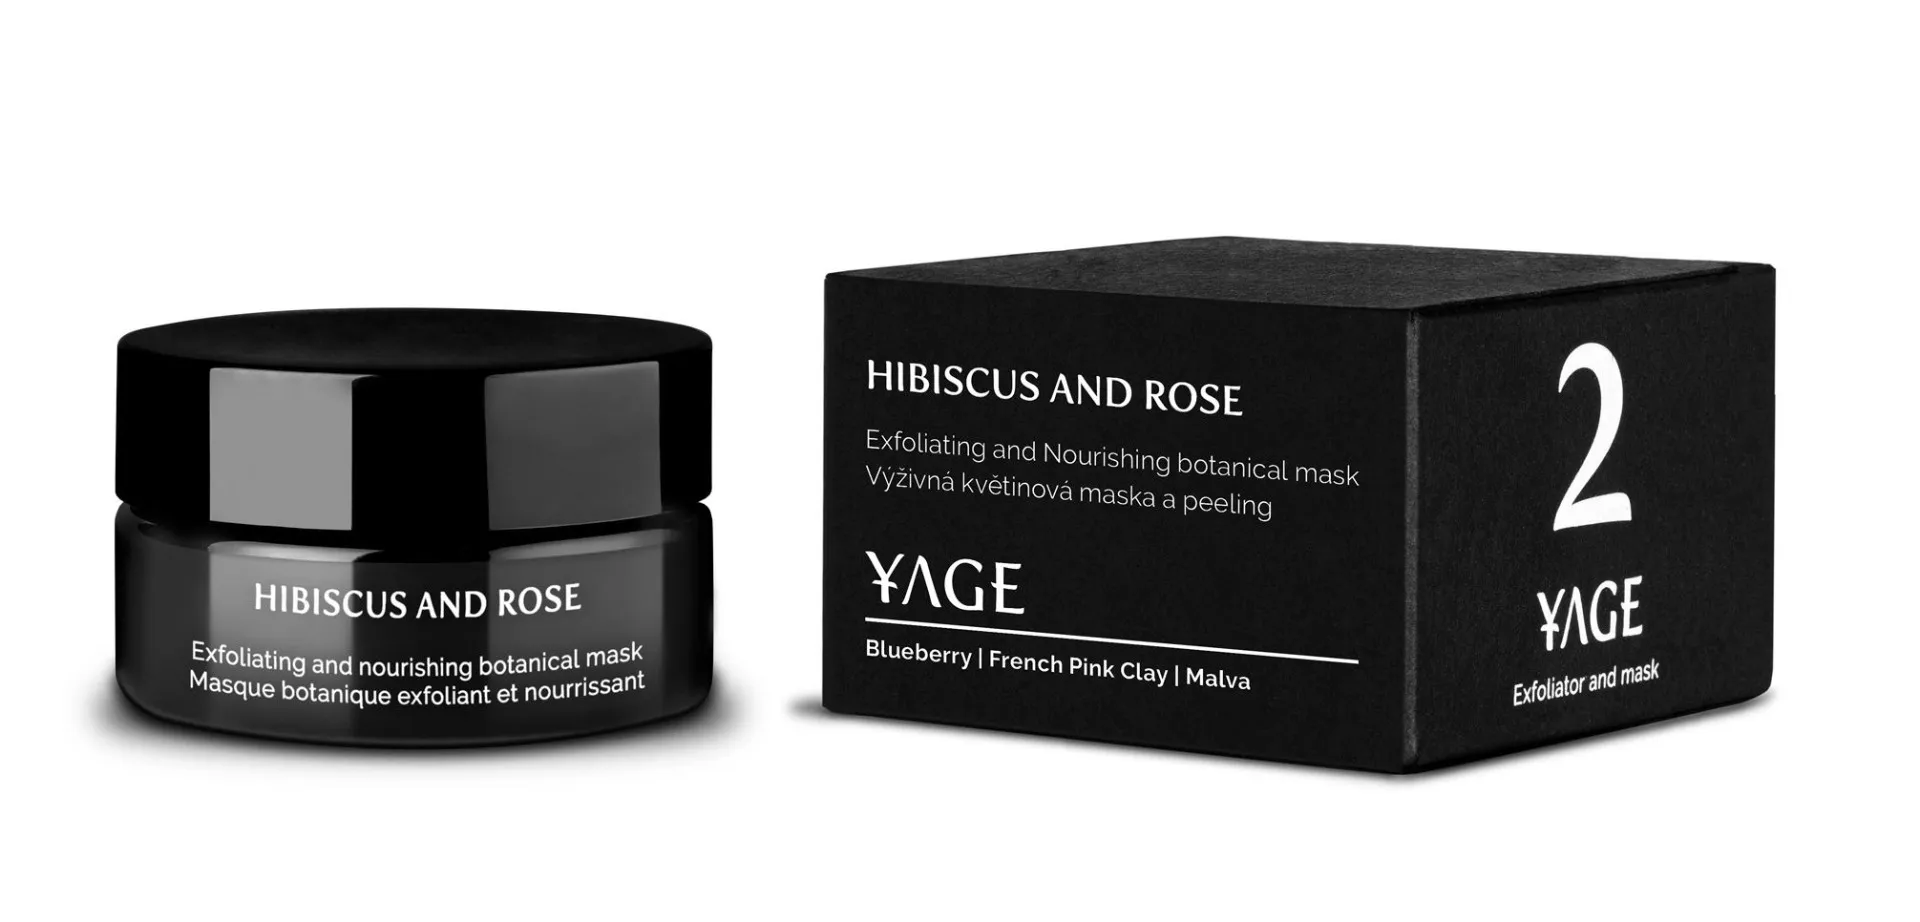 YAGE Hibiscus and Rose